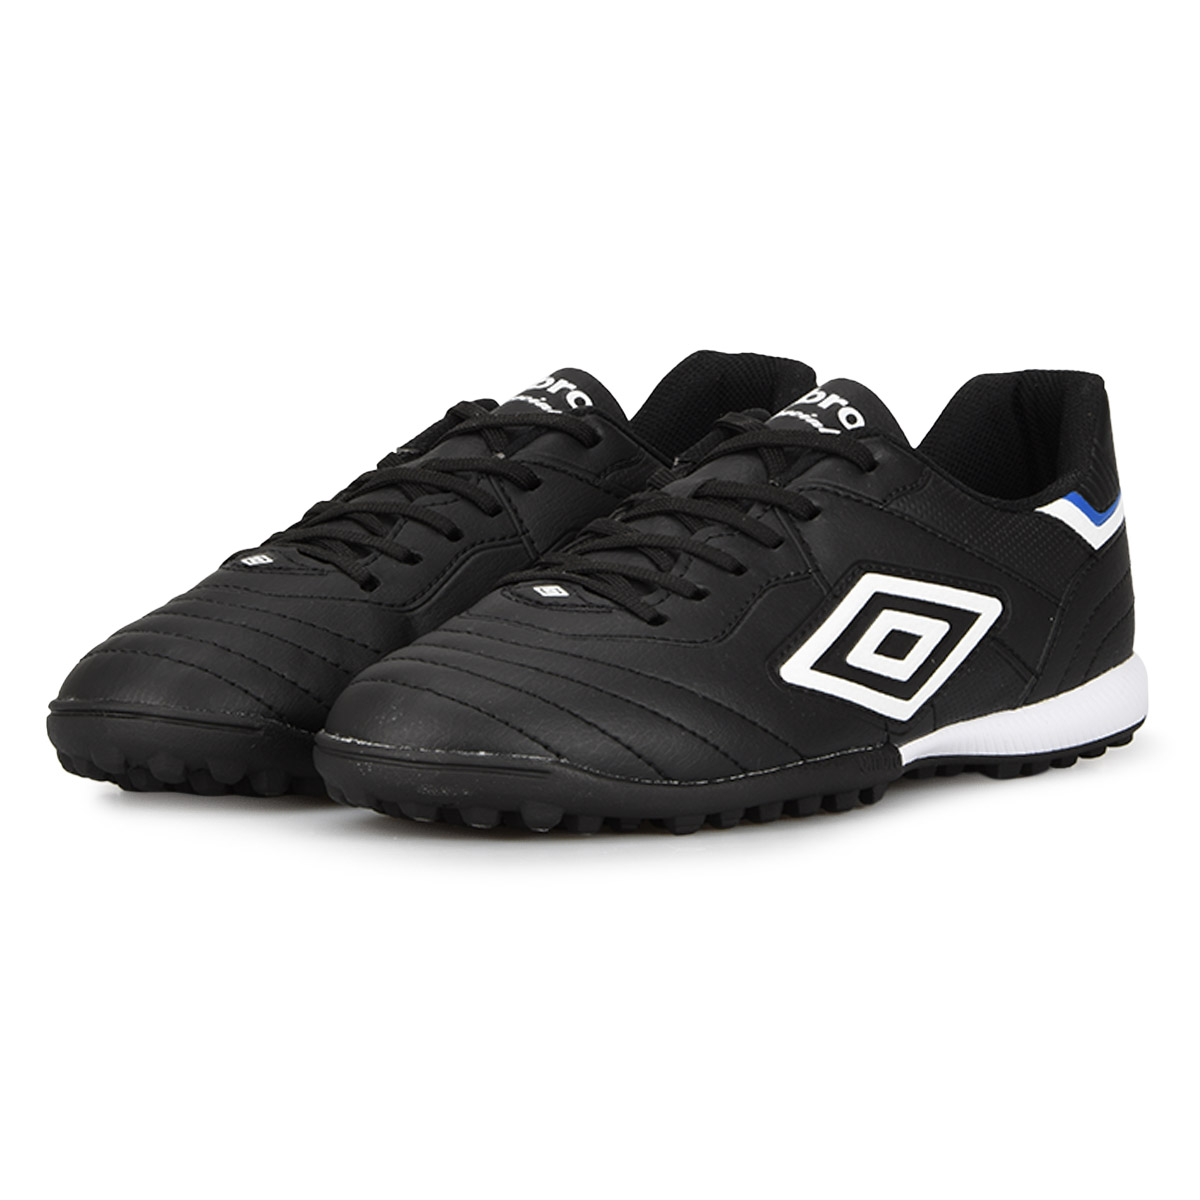 Botines Umbro Speciali lll League Sintetico,  image number null